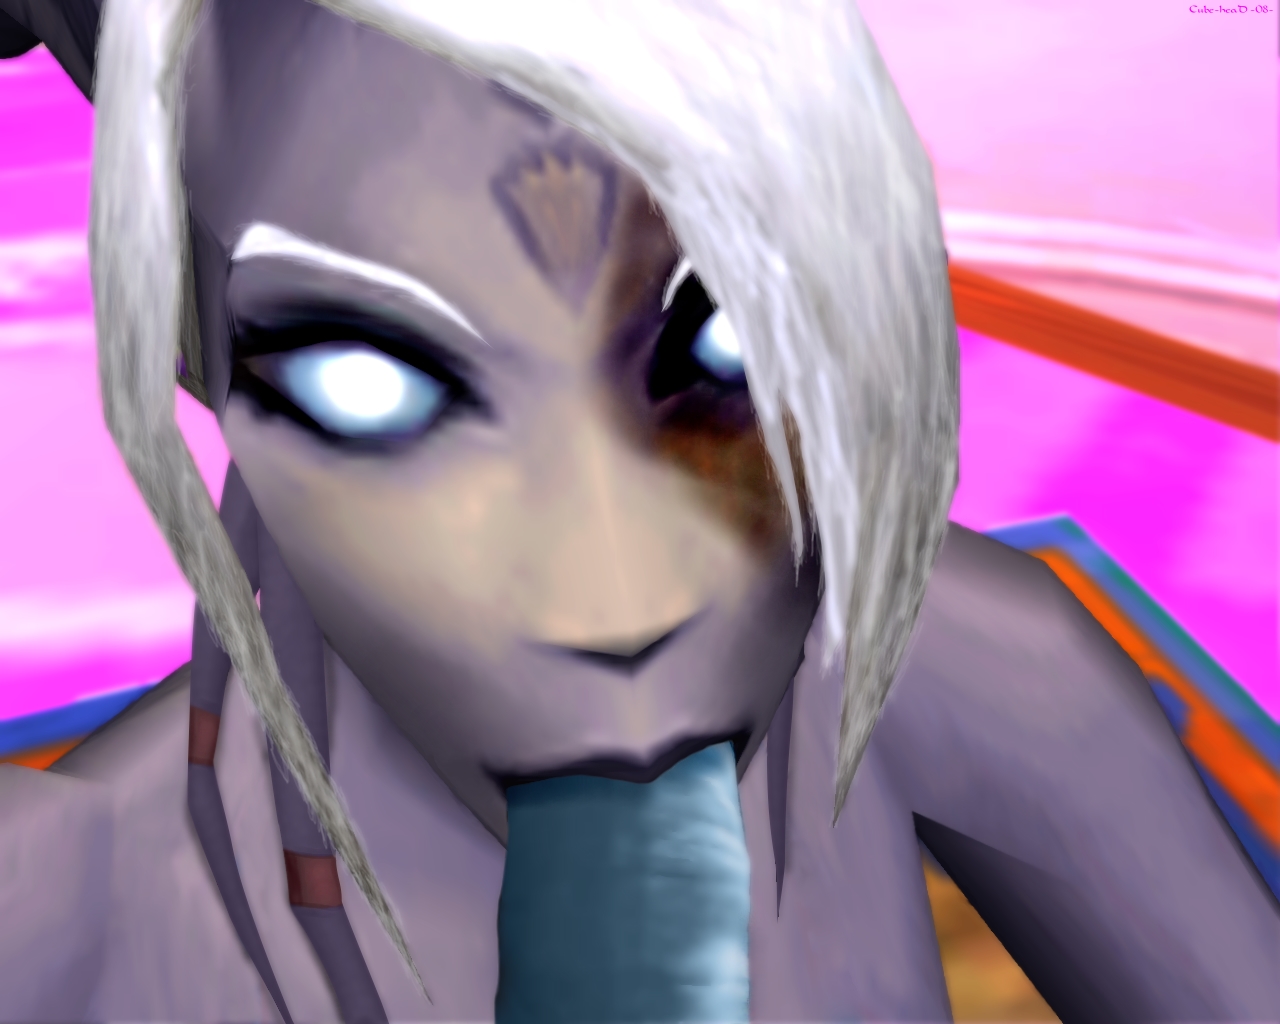 2008 was not as good as 2009, although I was learning.
Keywords: Draenei;OC;pre2010;oral;straight;POV